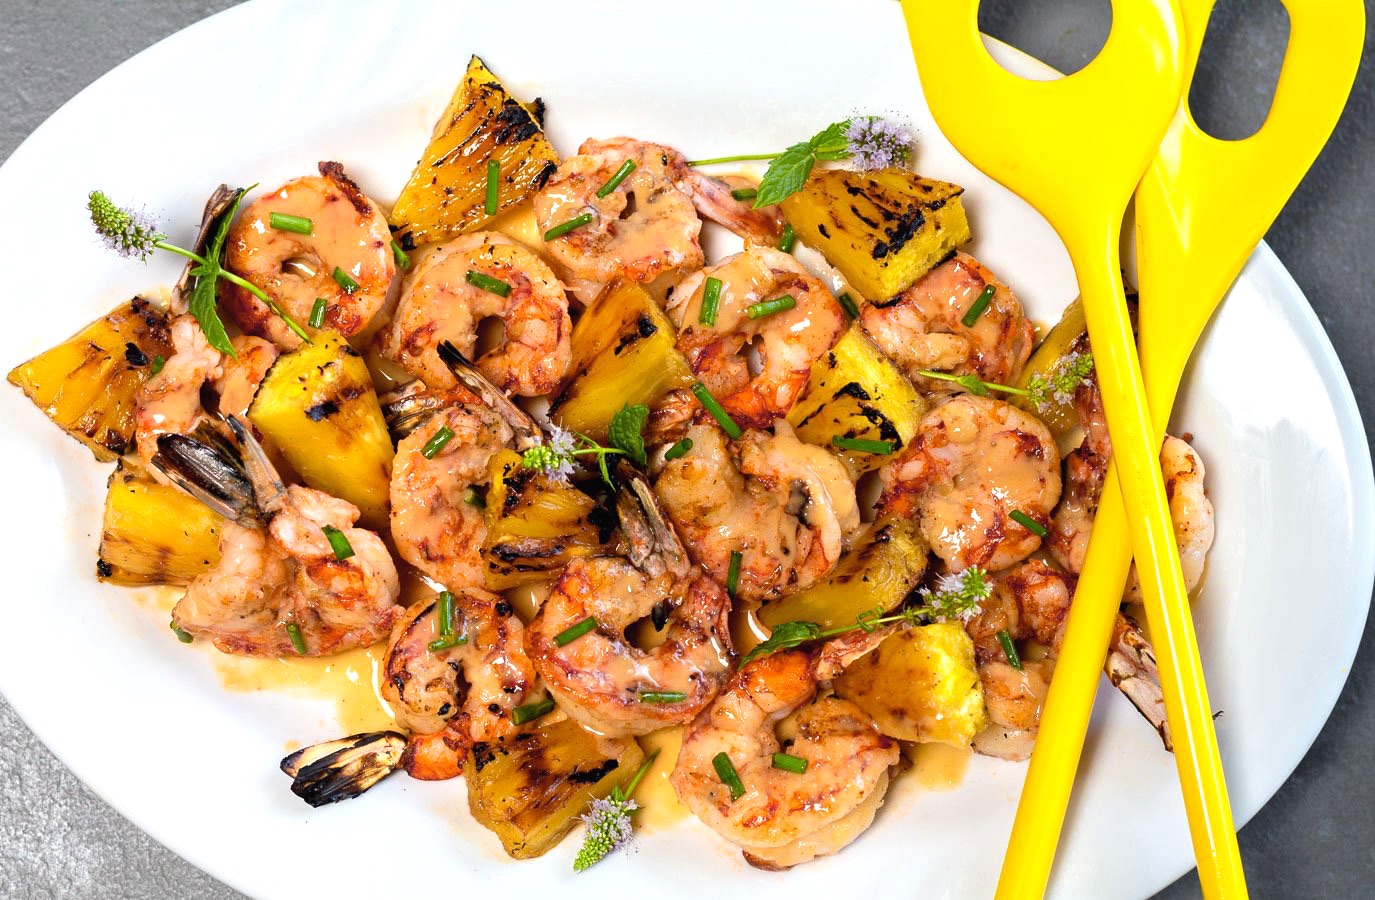 Grilled Shrimp & Pineapple with Gingery-Miso Dressing